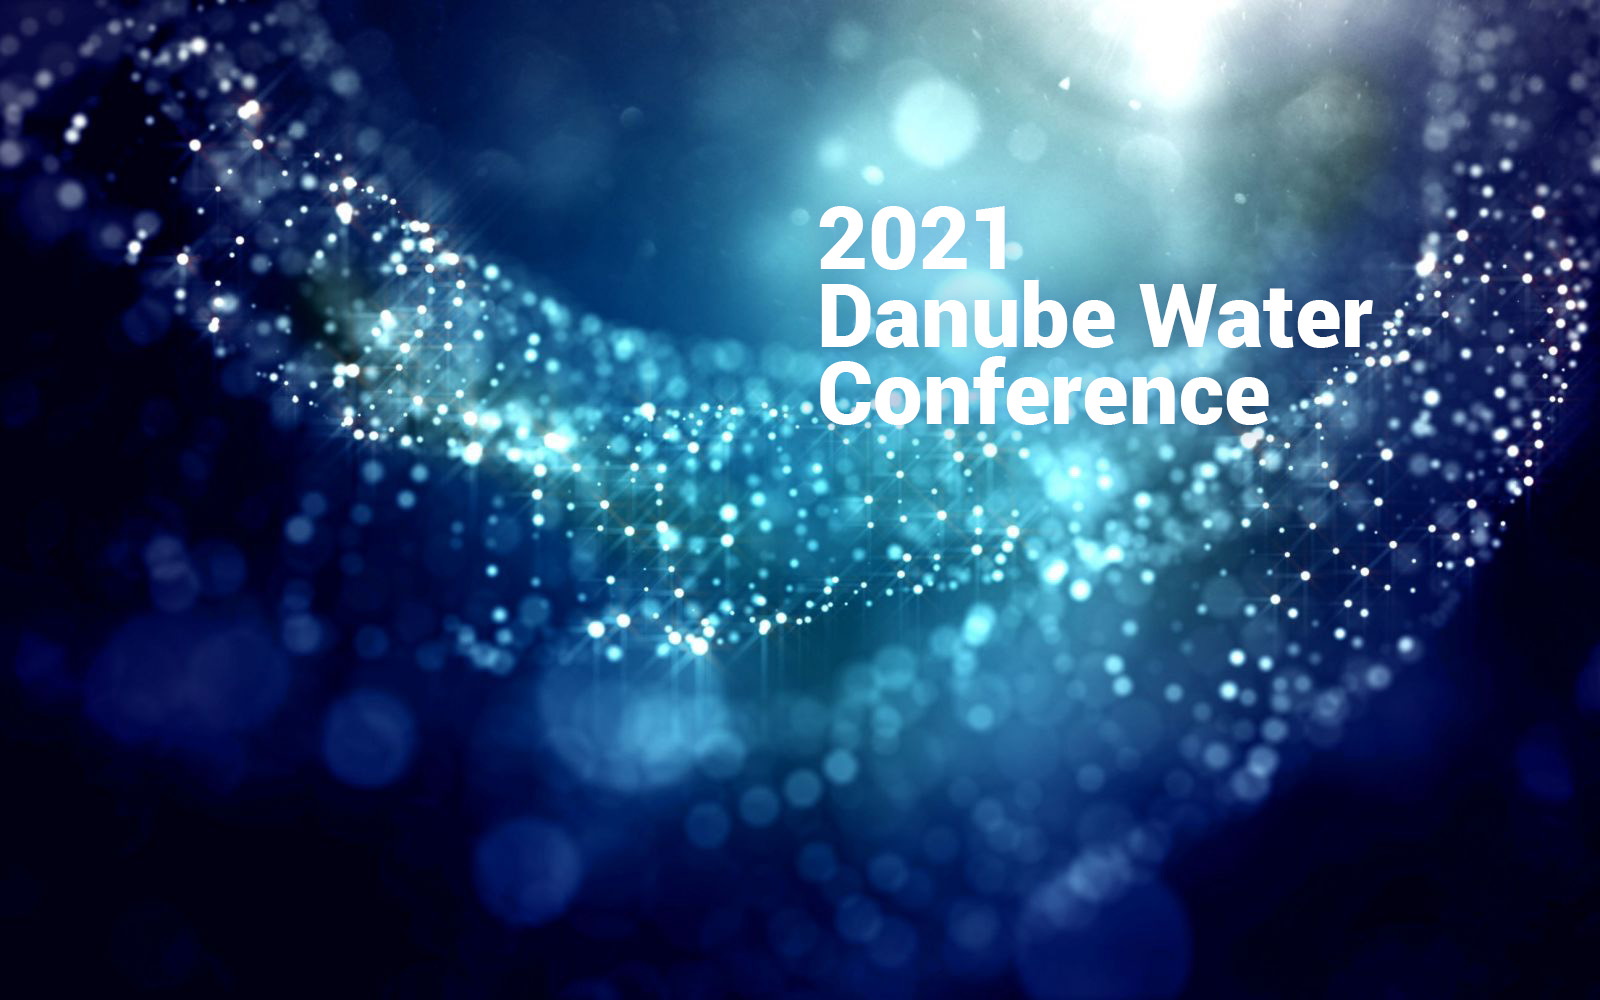 2021 Danube Water Conference: Let's Get Together Again!